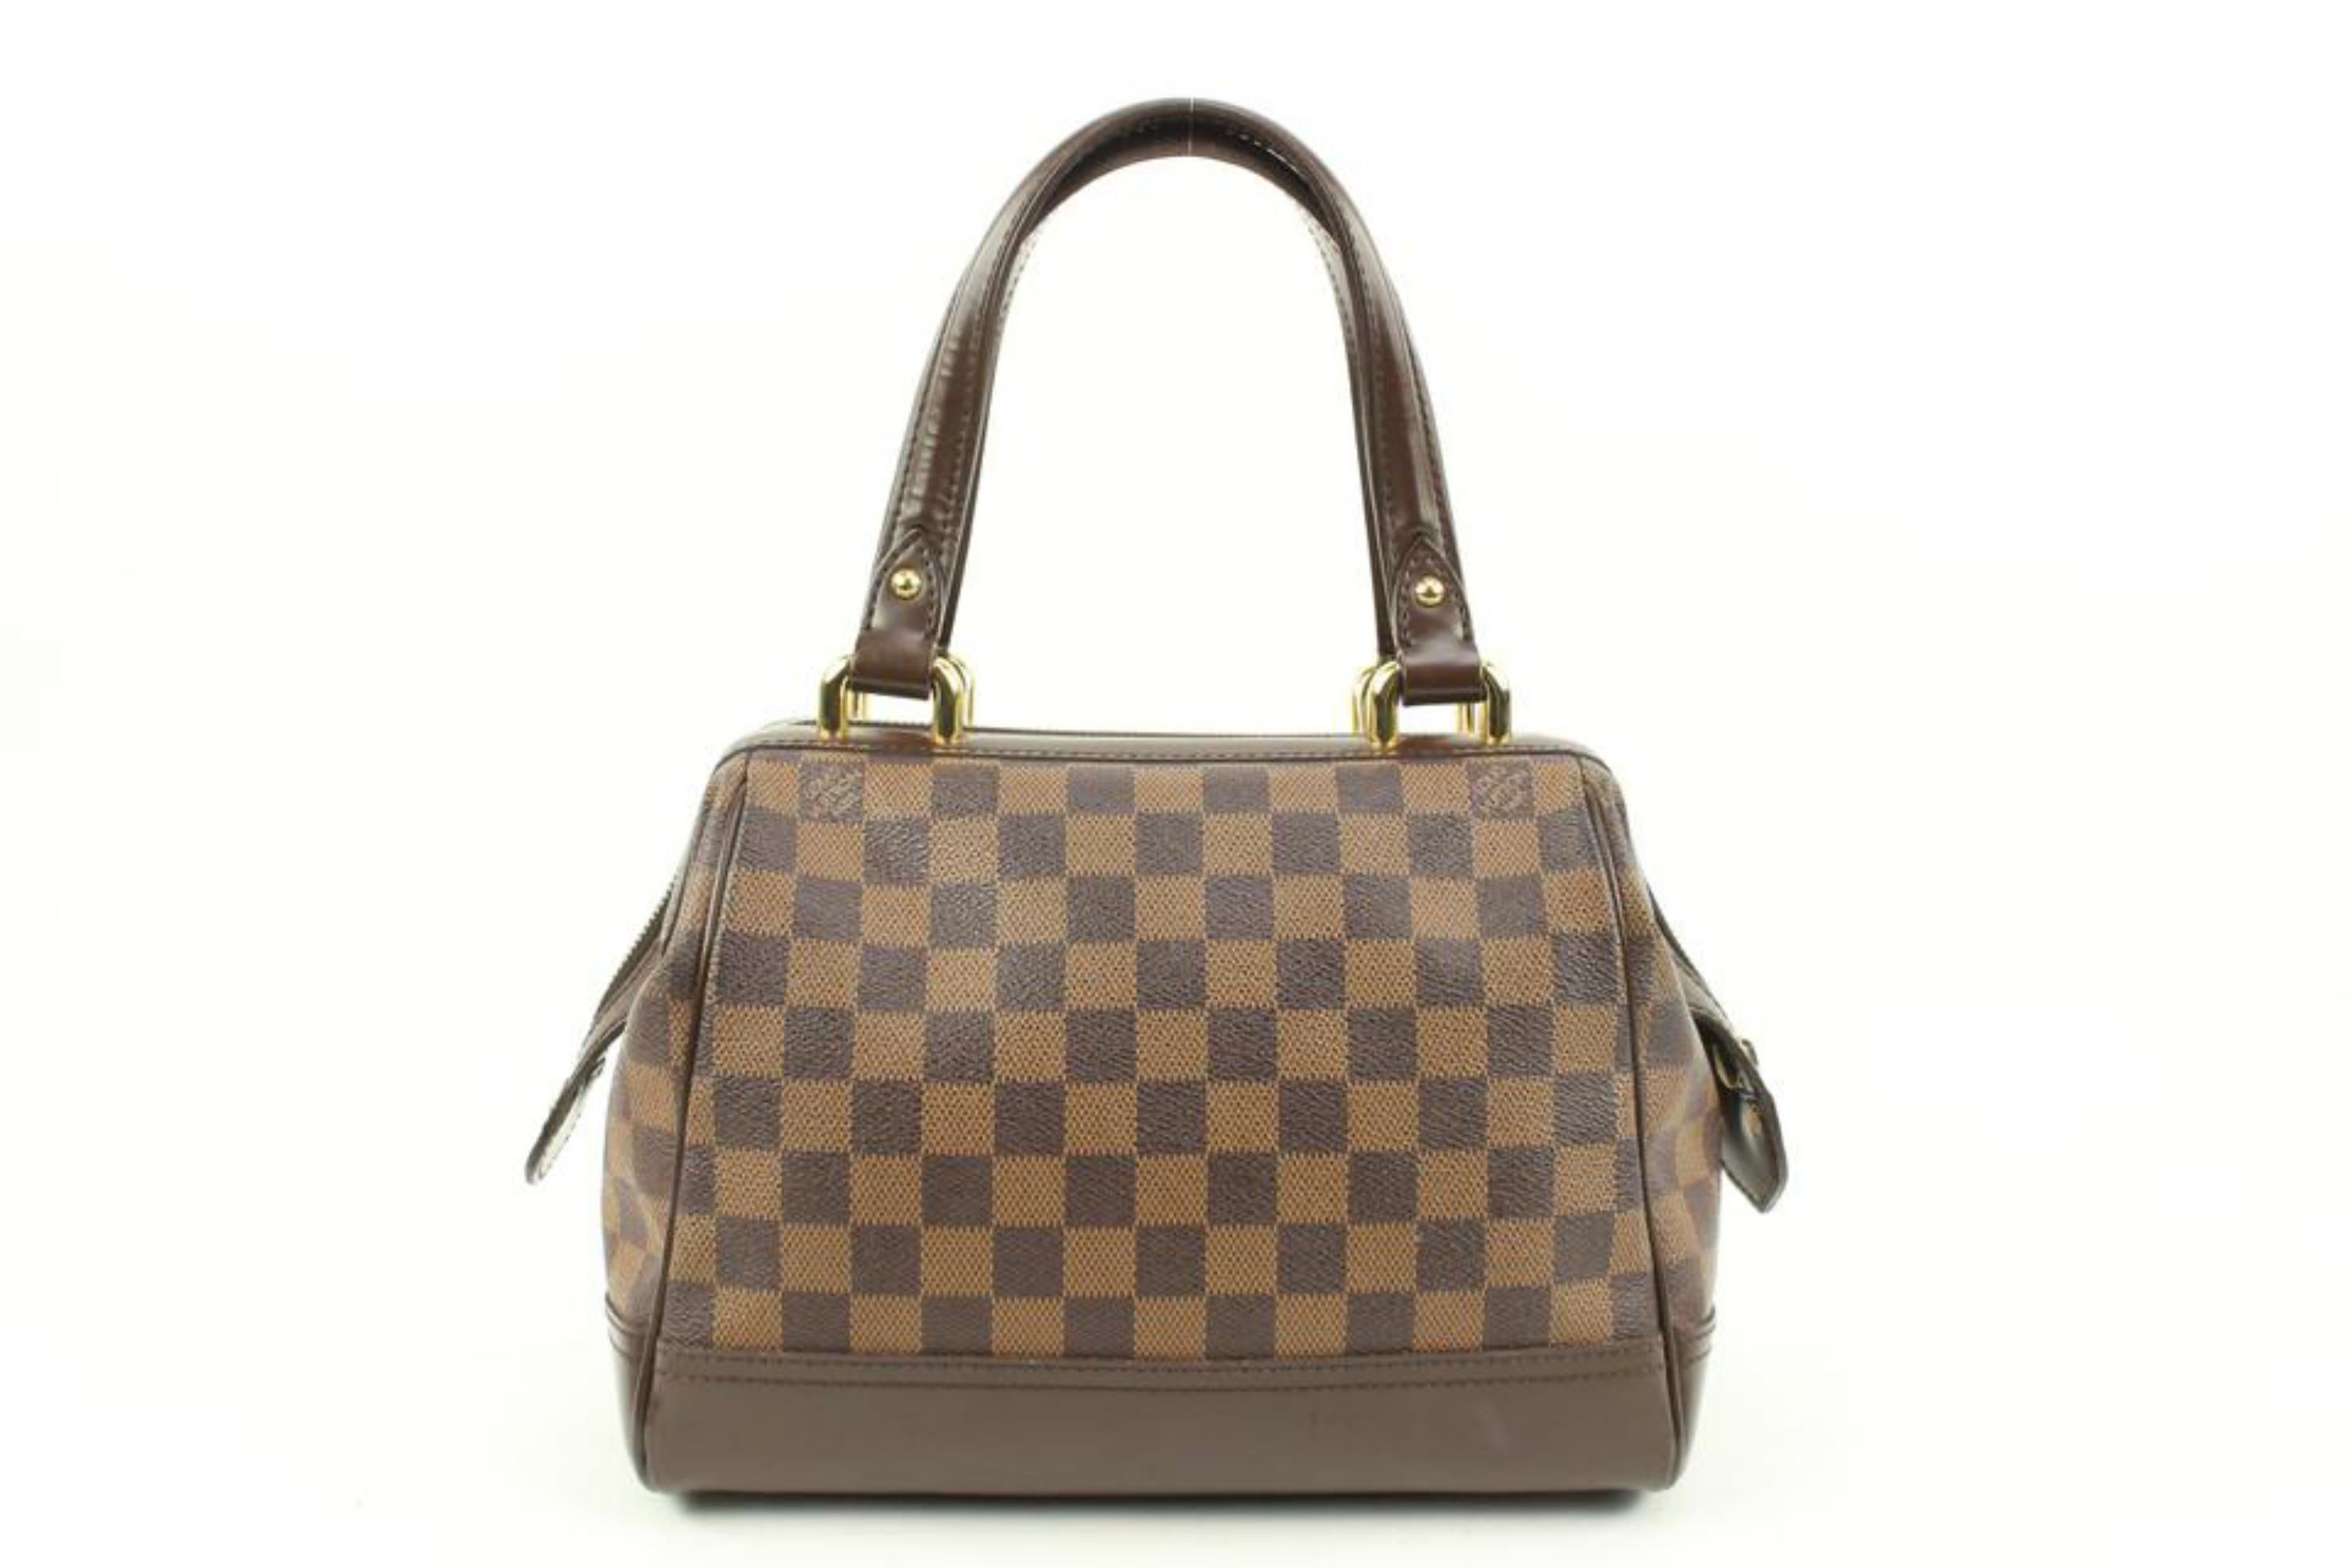 Louis Vuitton Damier Knightsbridge Buckle Boston Bag 3lv131s In Good Condition For Sale In Dix hills, NY